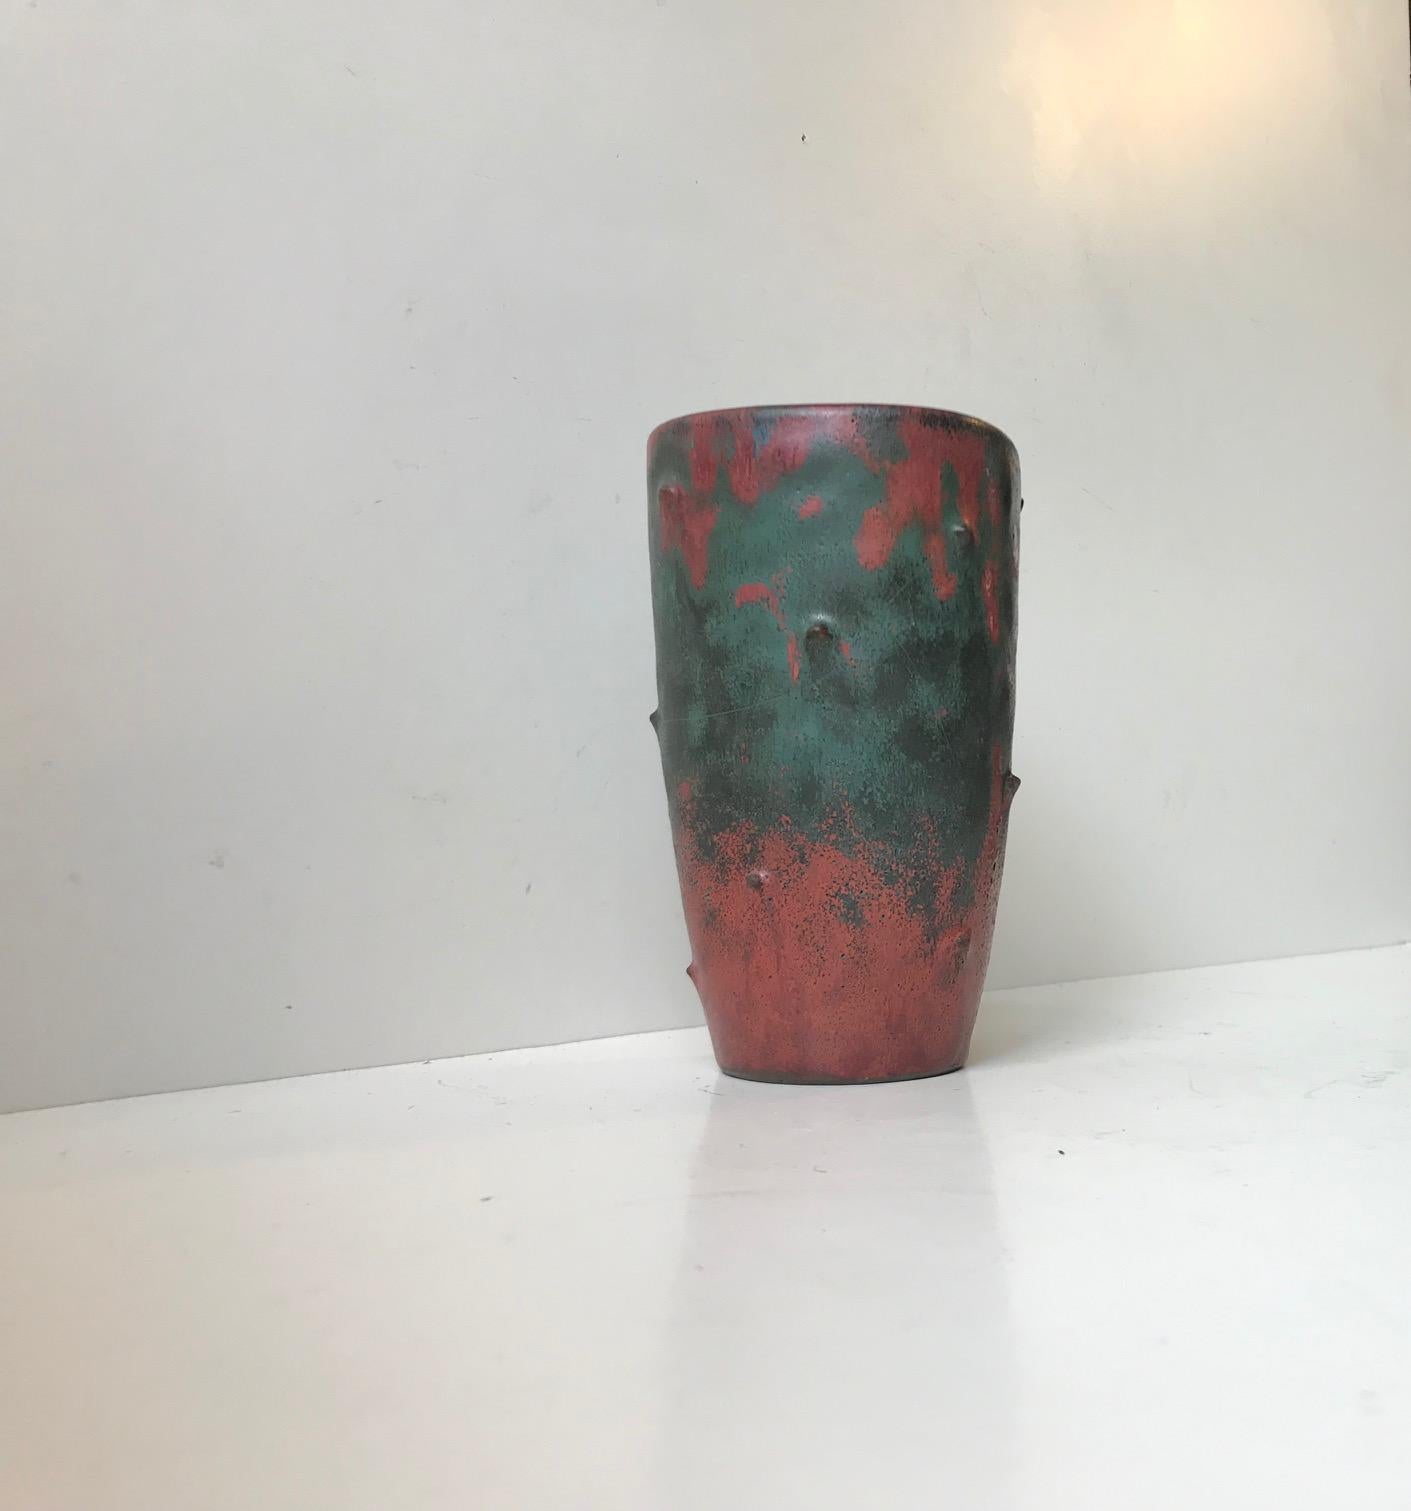 Vase with spikes and Camouflage glaze designed by the Danish ceramist and founder of Danico Niels Peter Nielsen. This piece was created at Dagnæs Keramik during the 1930s or 1940s in a style reminiscent of Berndt Friberg, Stig Lindberg and Svend